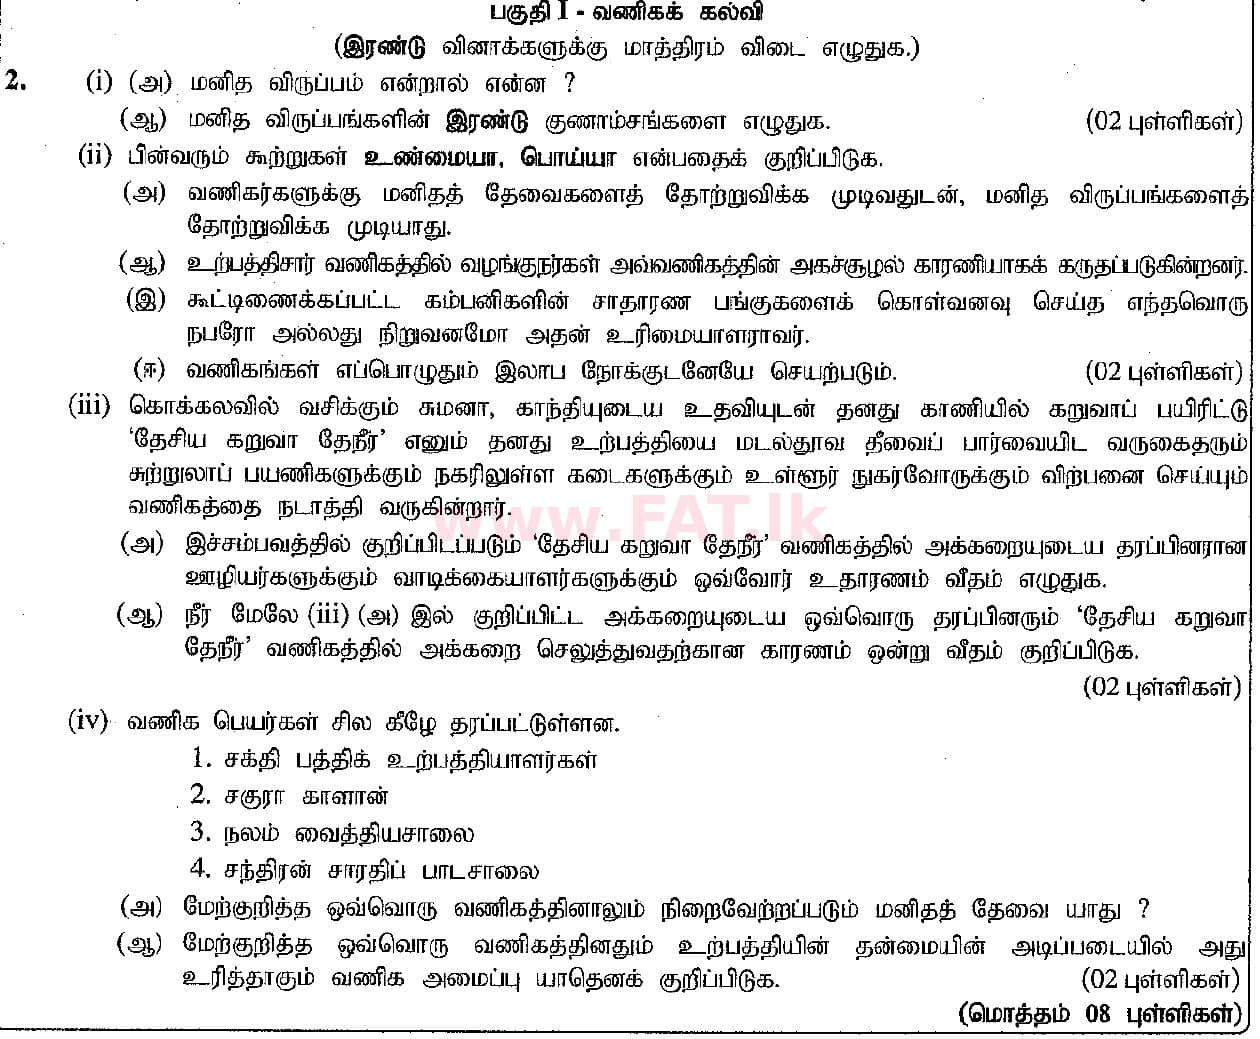 National Syllabus : Ordinary Level (O/L) Business and Accounting Studies - 2019 March - Paper II (தமிழ் Medium) 2 1